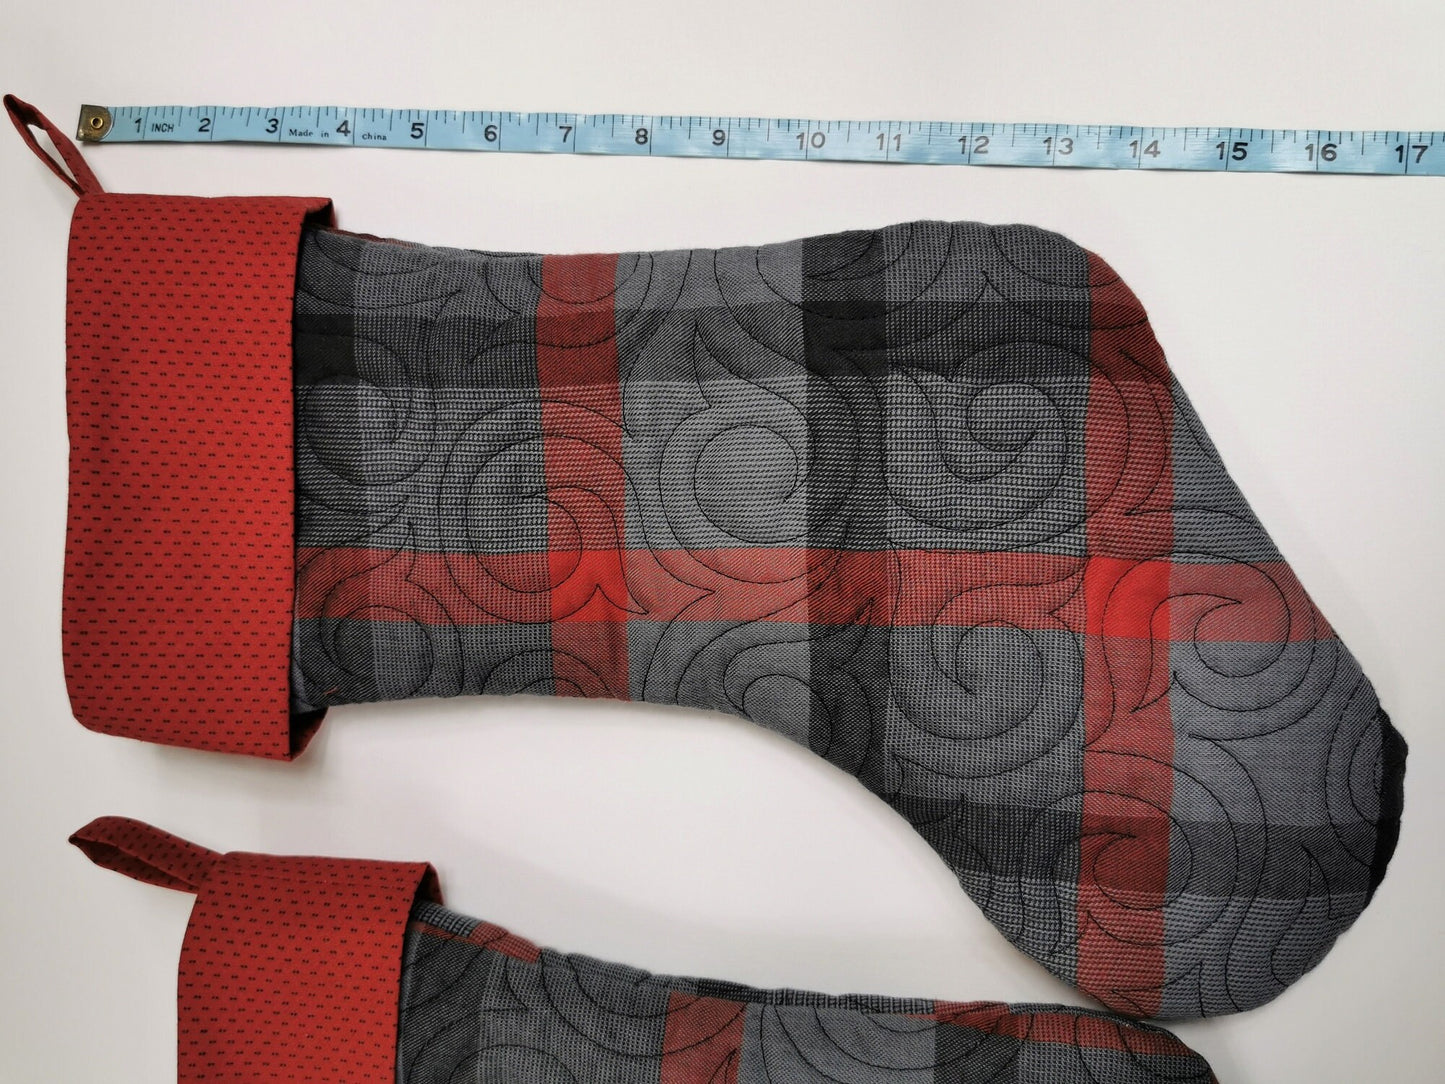 showing length of the quilted stocking with a tape measure